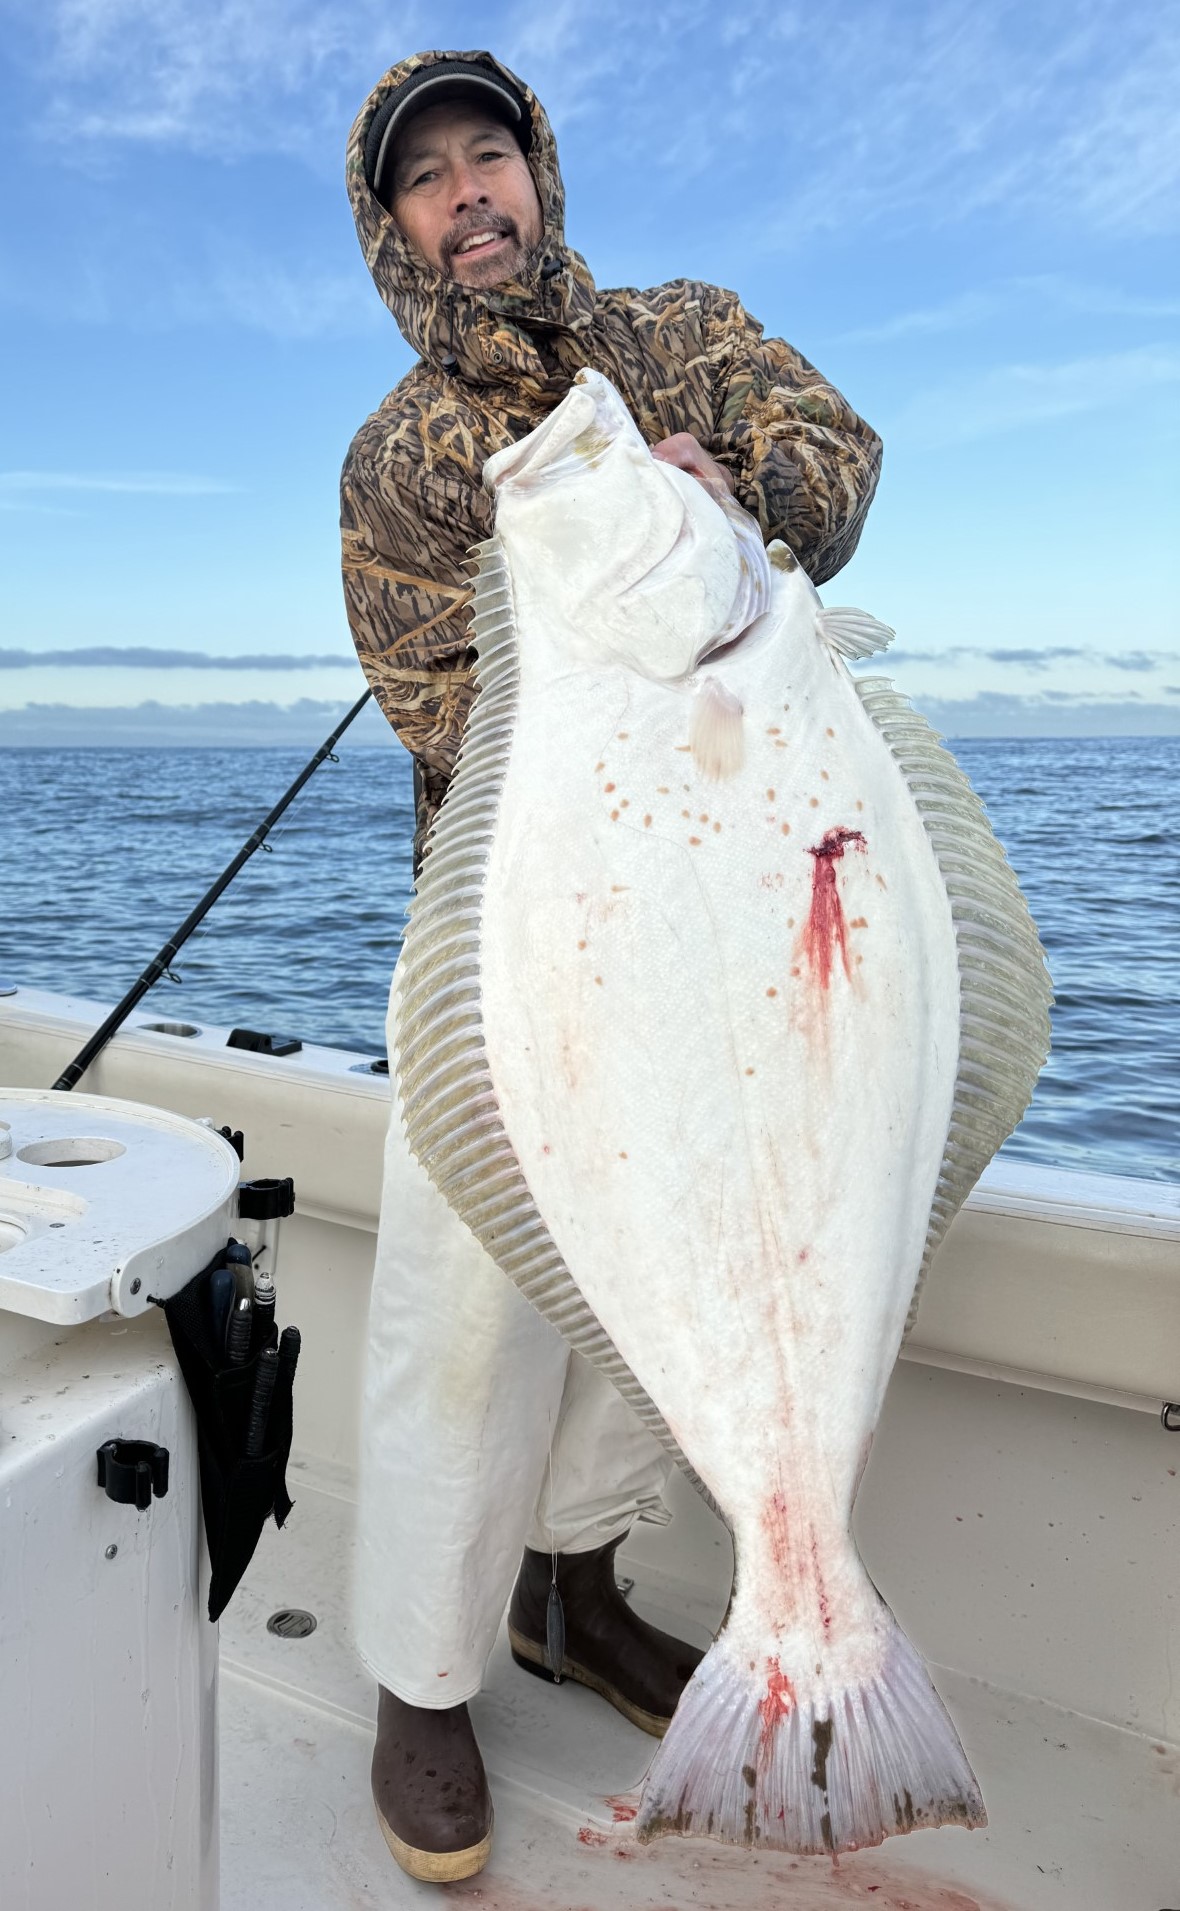 LOCAL WATERS FLATFISH – This 30 pounder was caught by Merit McCrea just outside the Federal Breakwater off Long Beach. A live sardine proved a fatal attractant for this fish. PHOTO BY “IZORLINE” WENDY TOCHIHARA